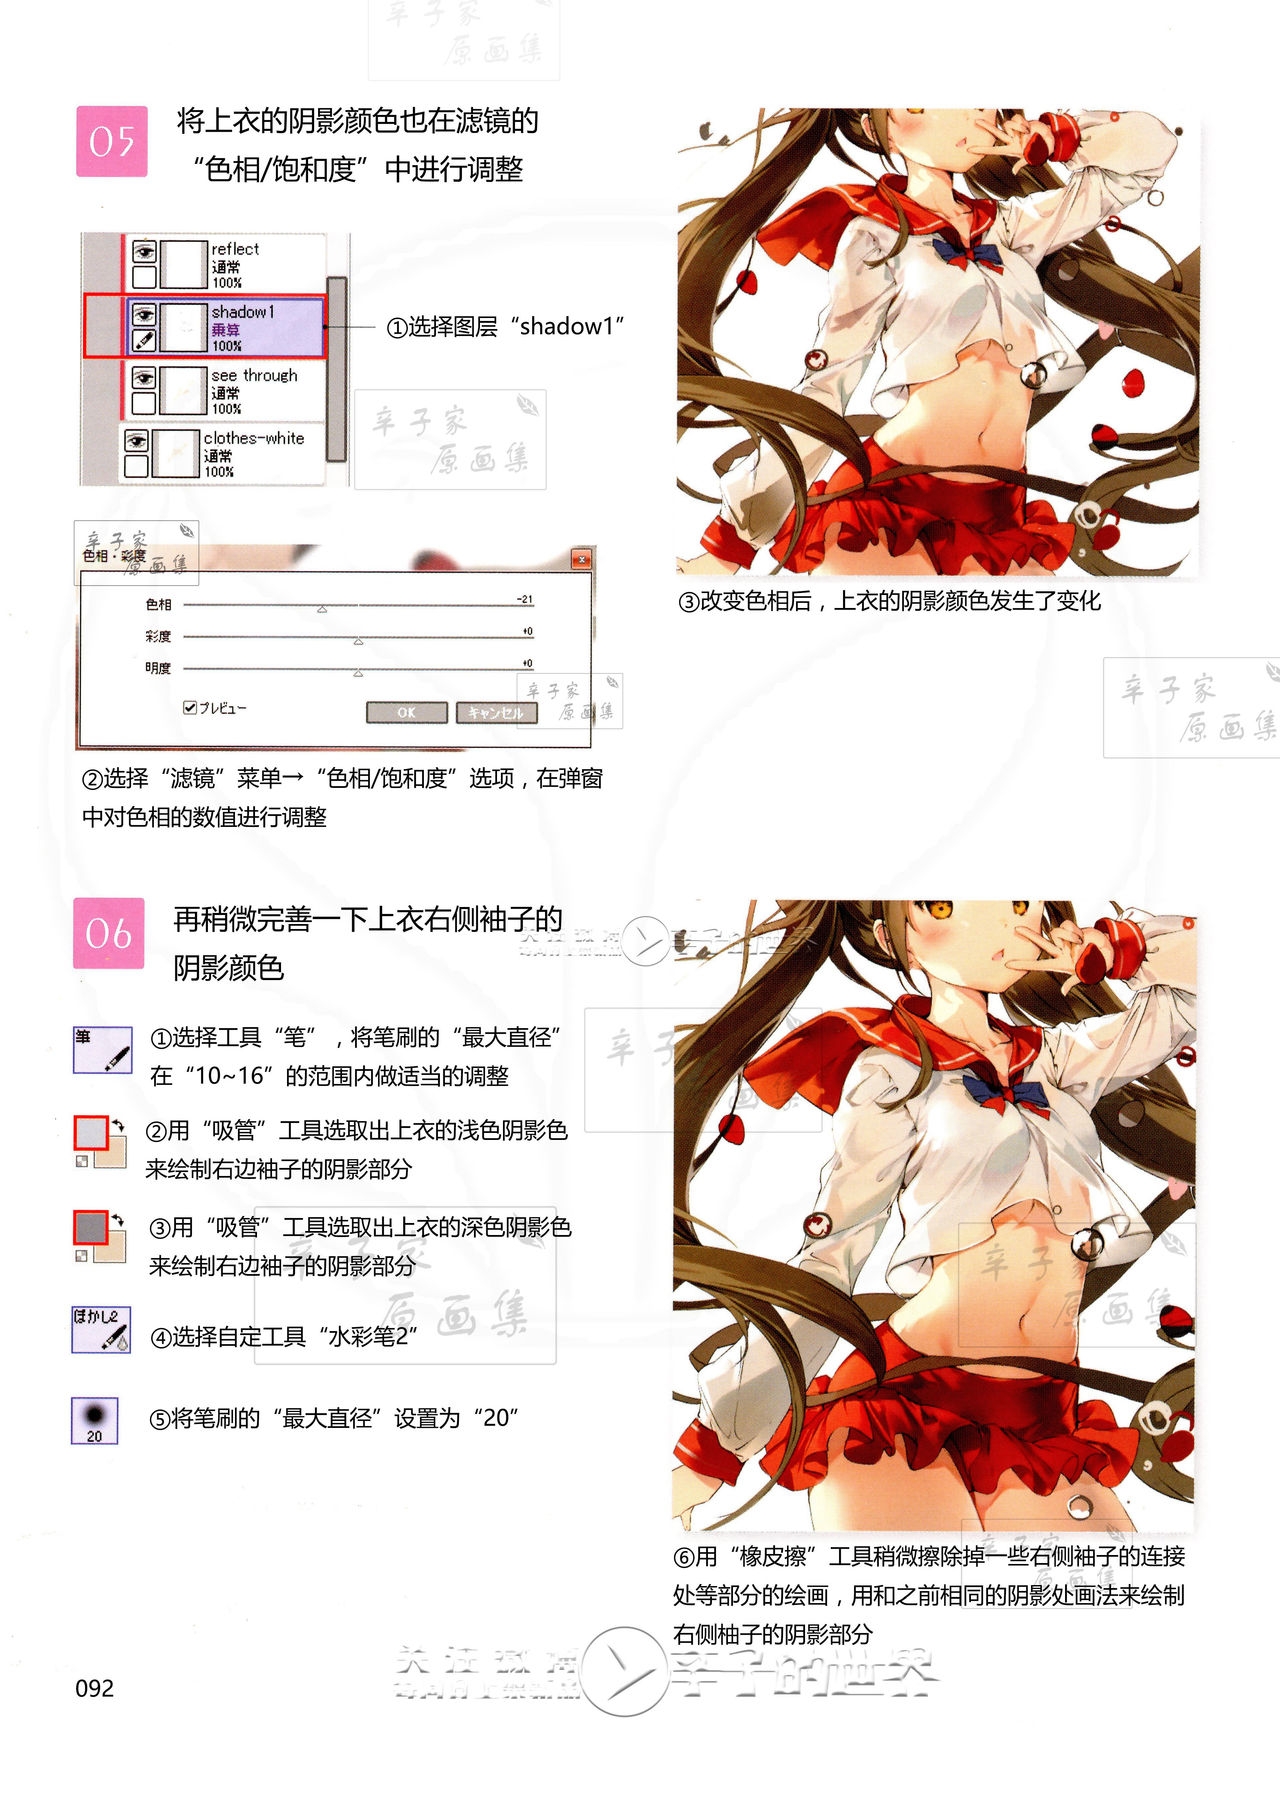 [Anmi] Lets Make ★ Character CG illustration techniques vol.9 [Chinese] 90